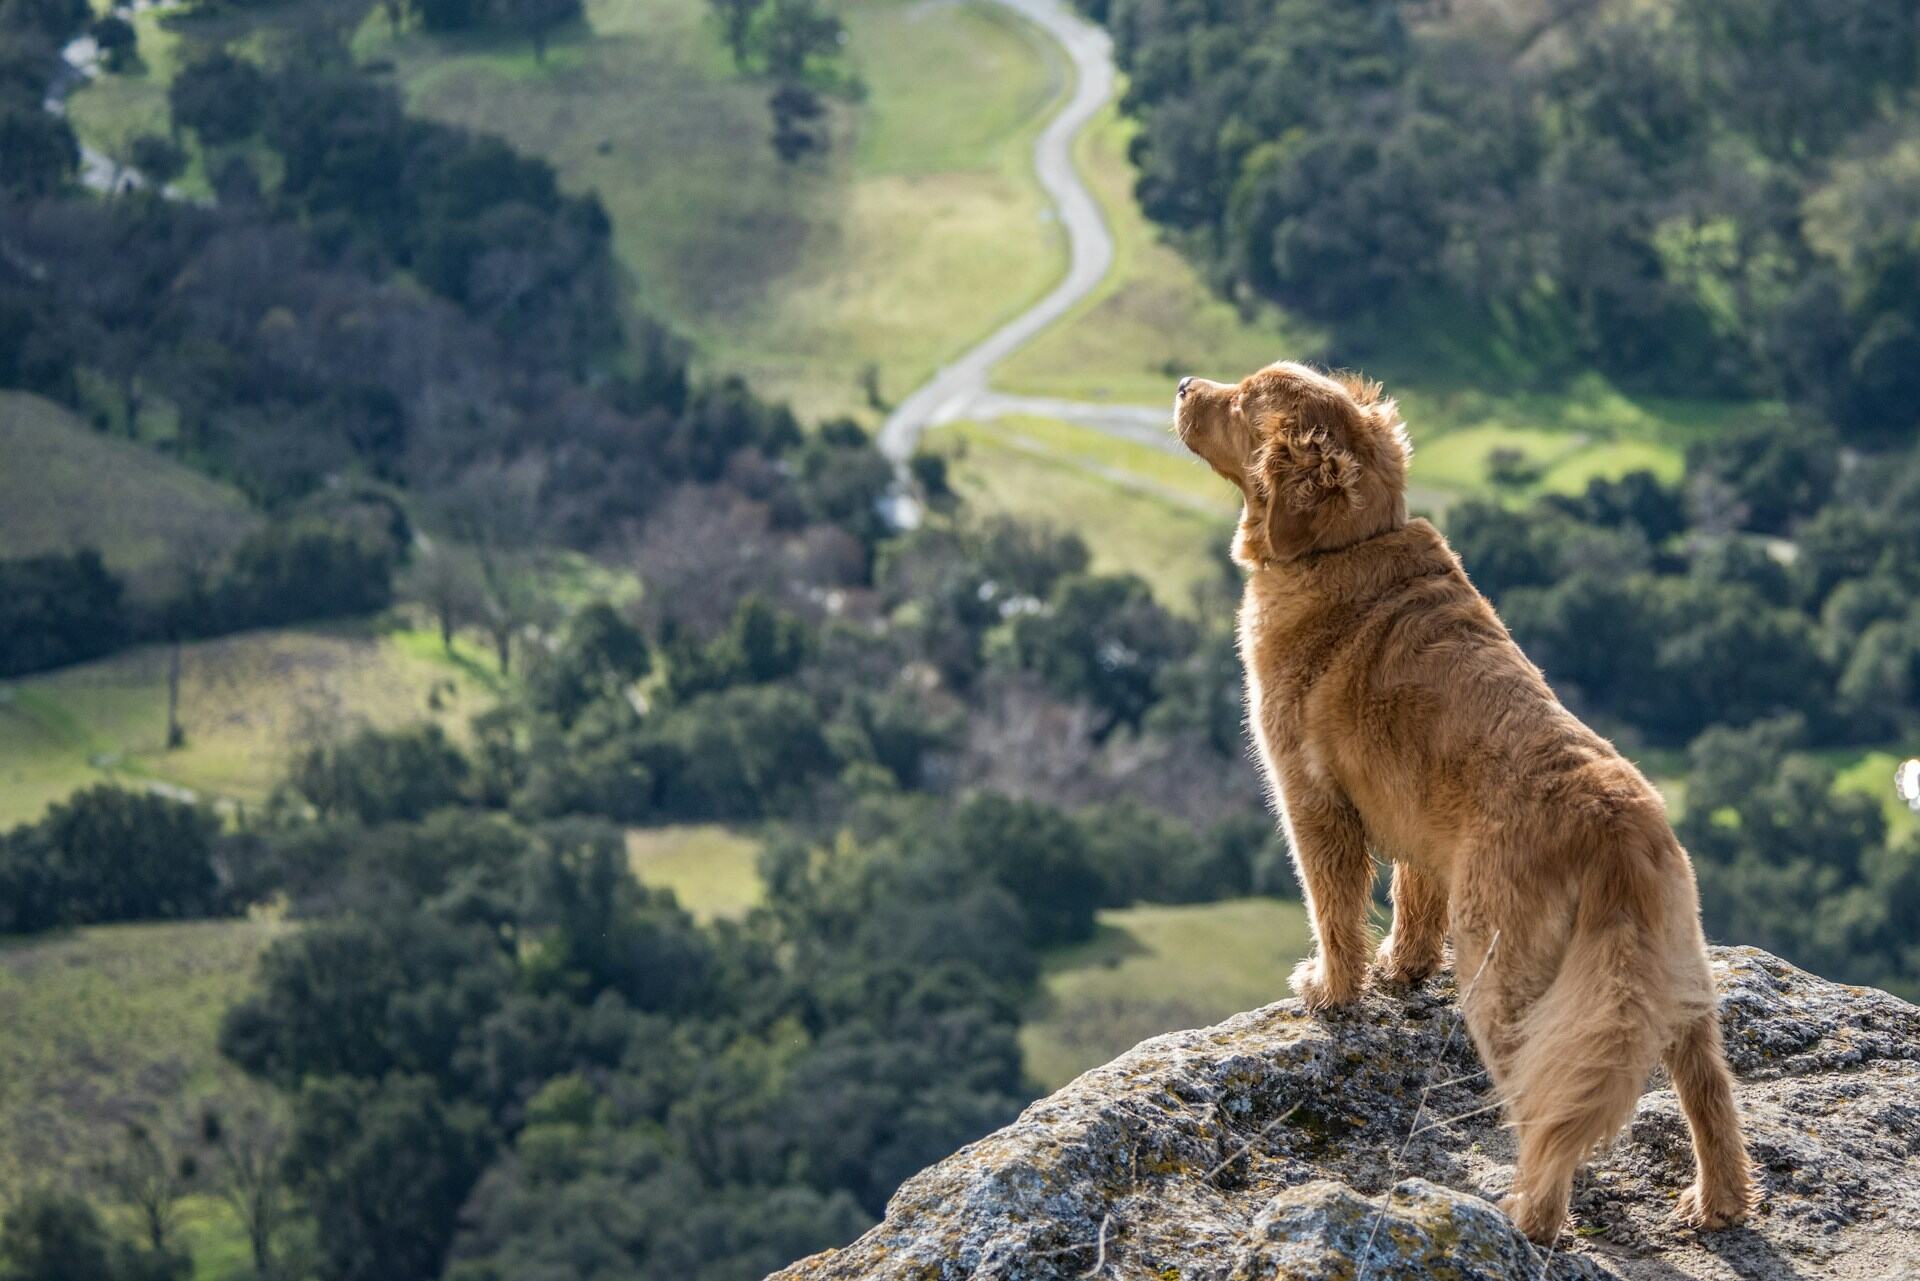 A dog looking over a mountain cliff down into a forest